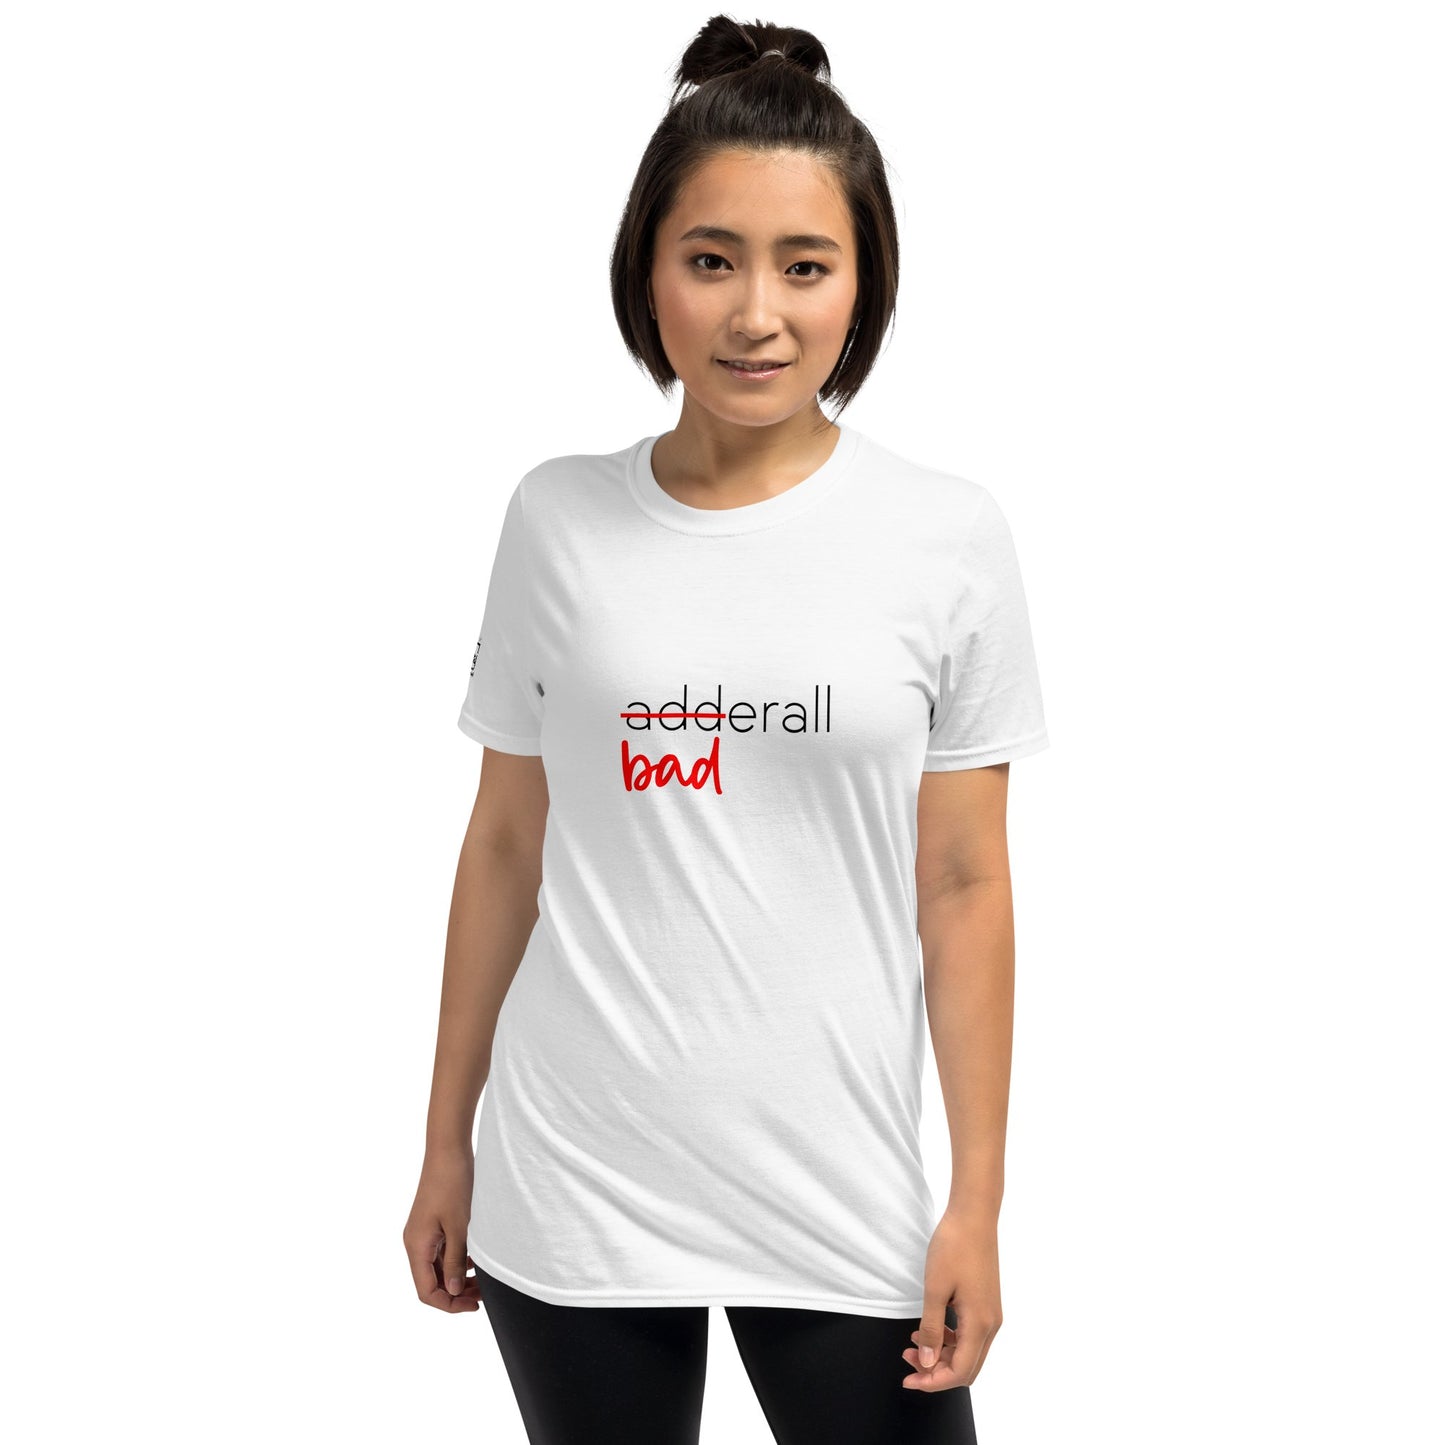 TaDay - Baderall - Short Sleeve Unisex T-Shirt - BeExtra! Apparel & More